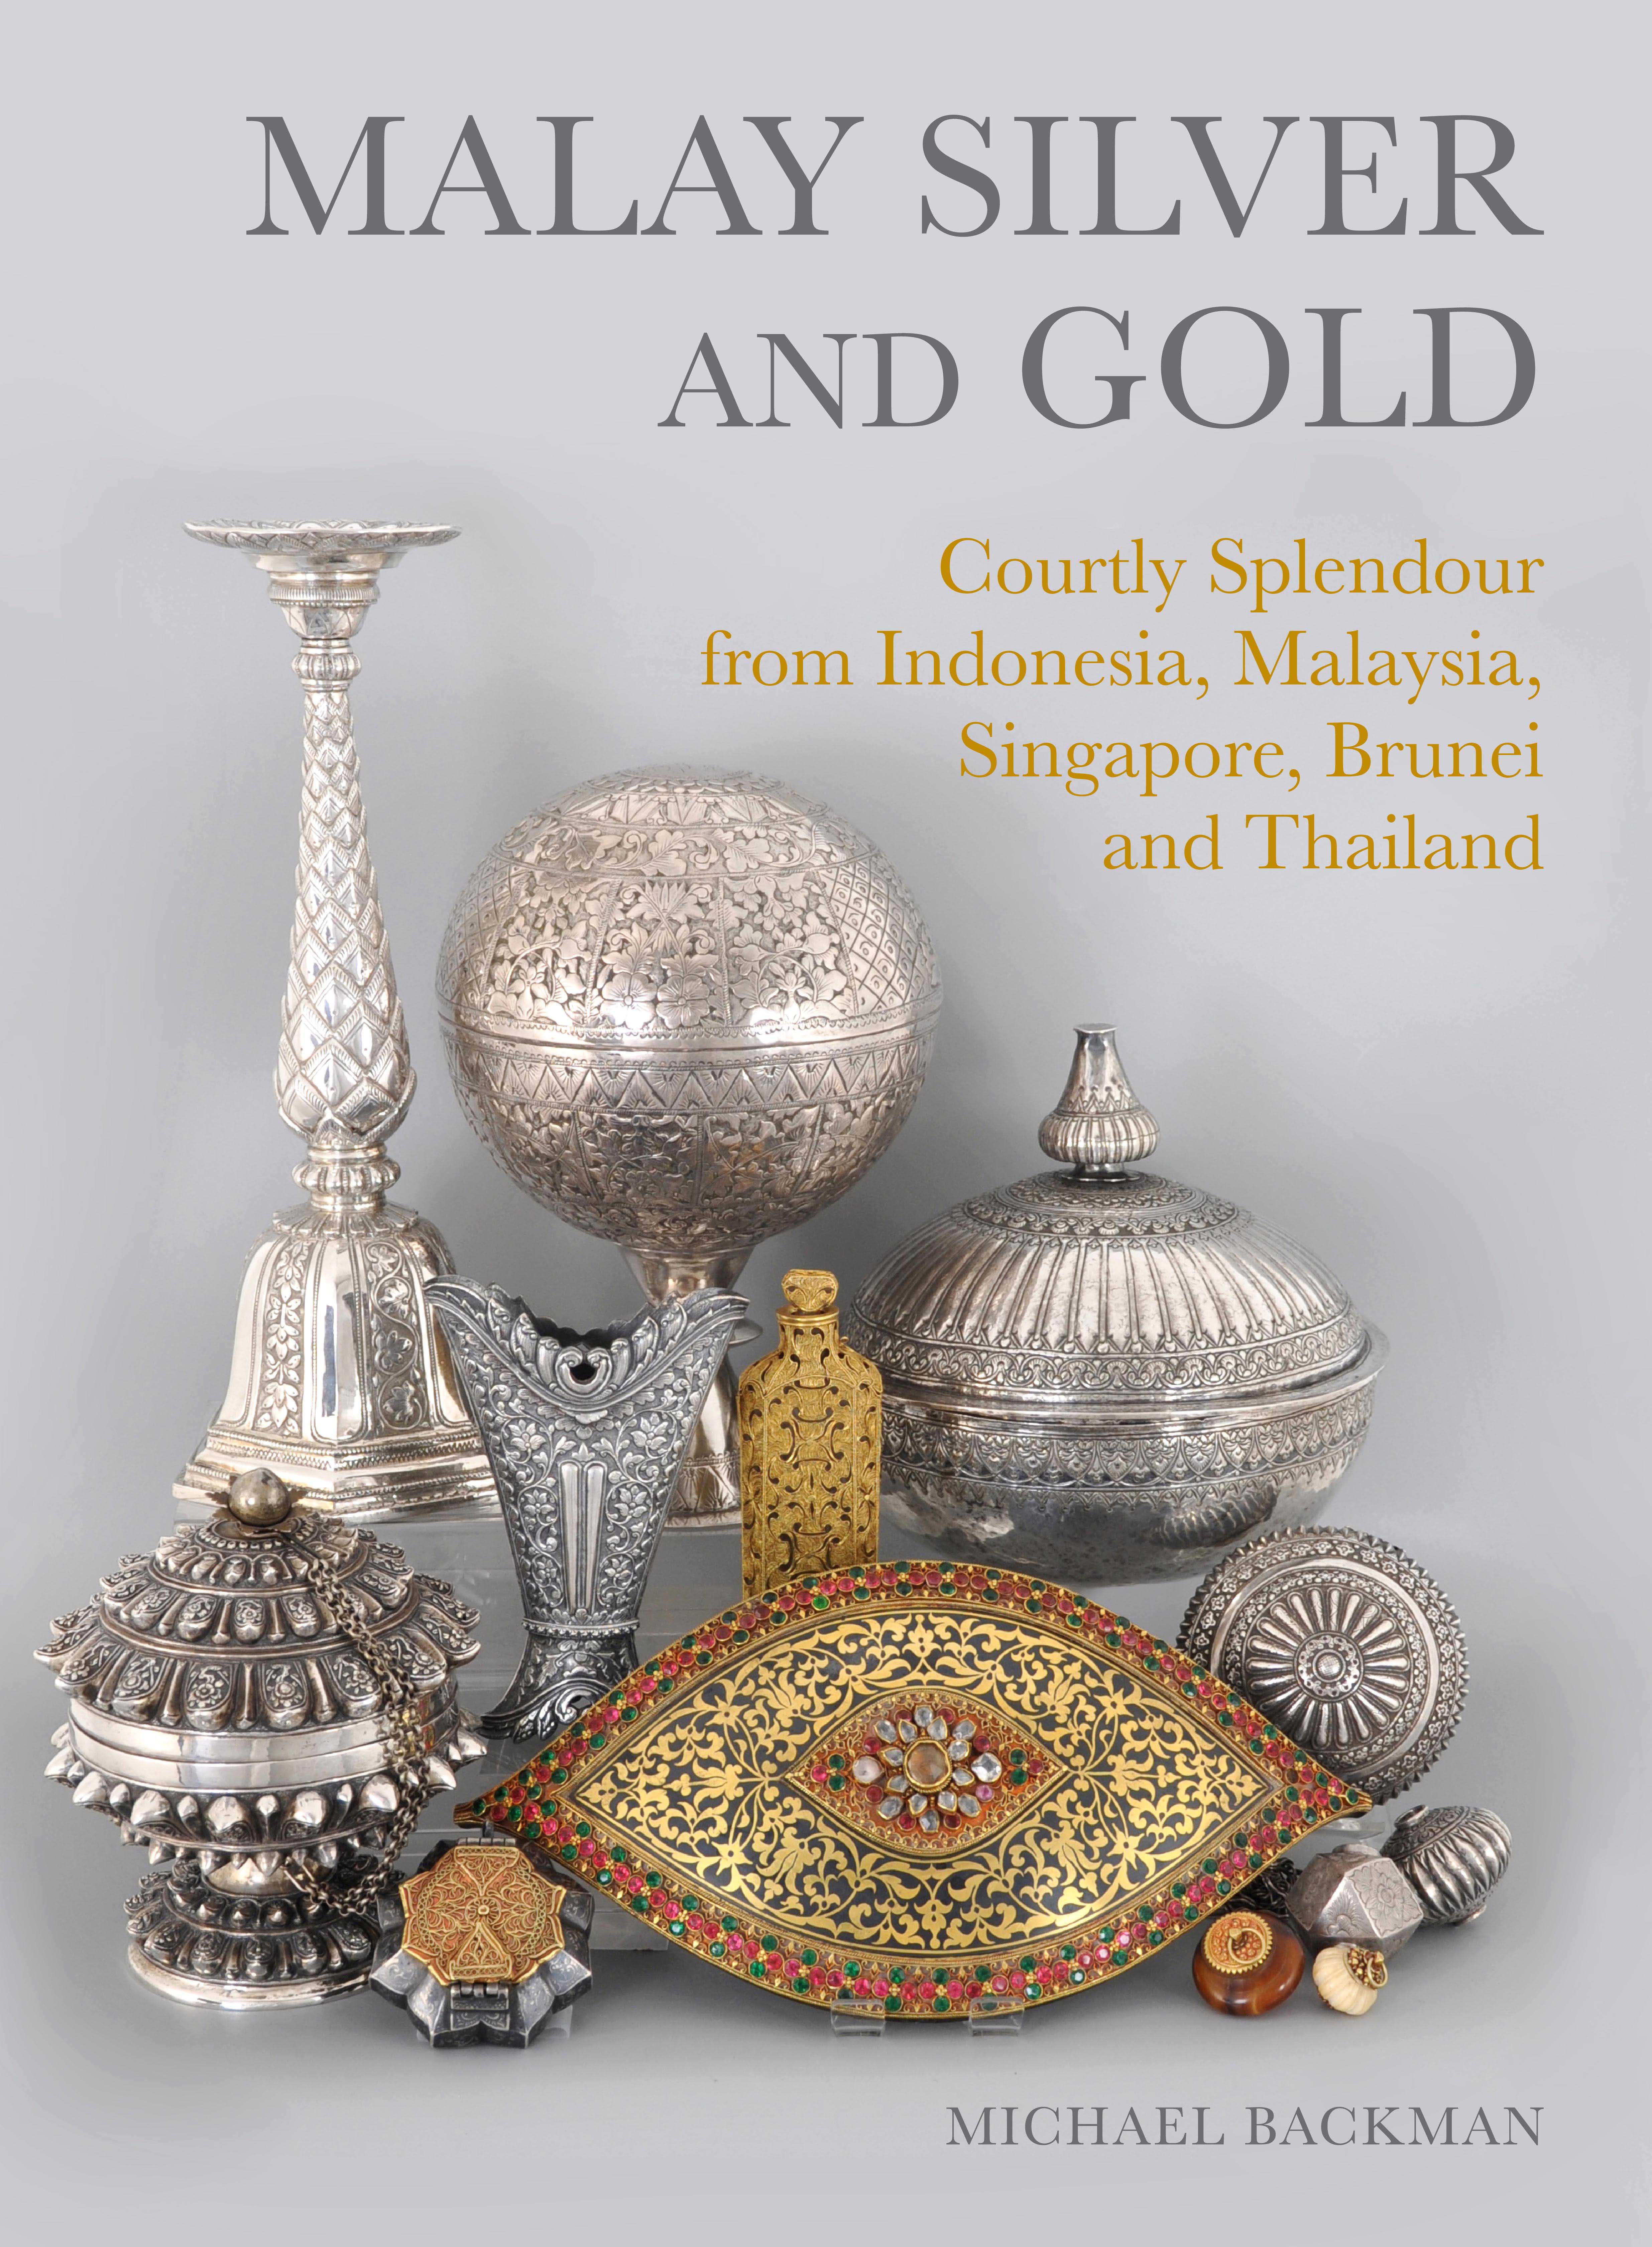 MALAY SILVER AND GOLD